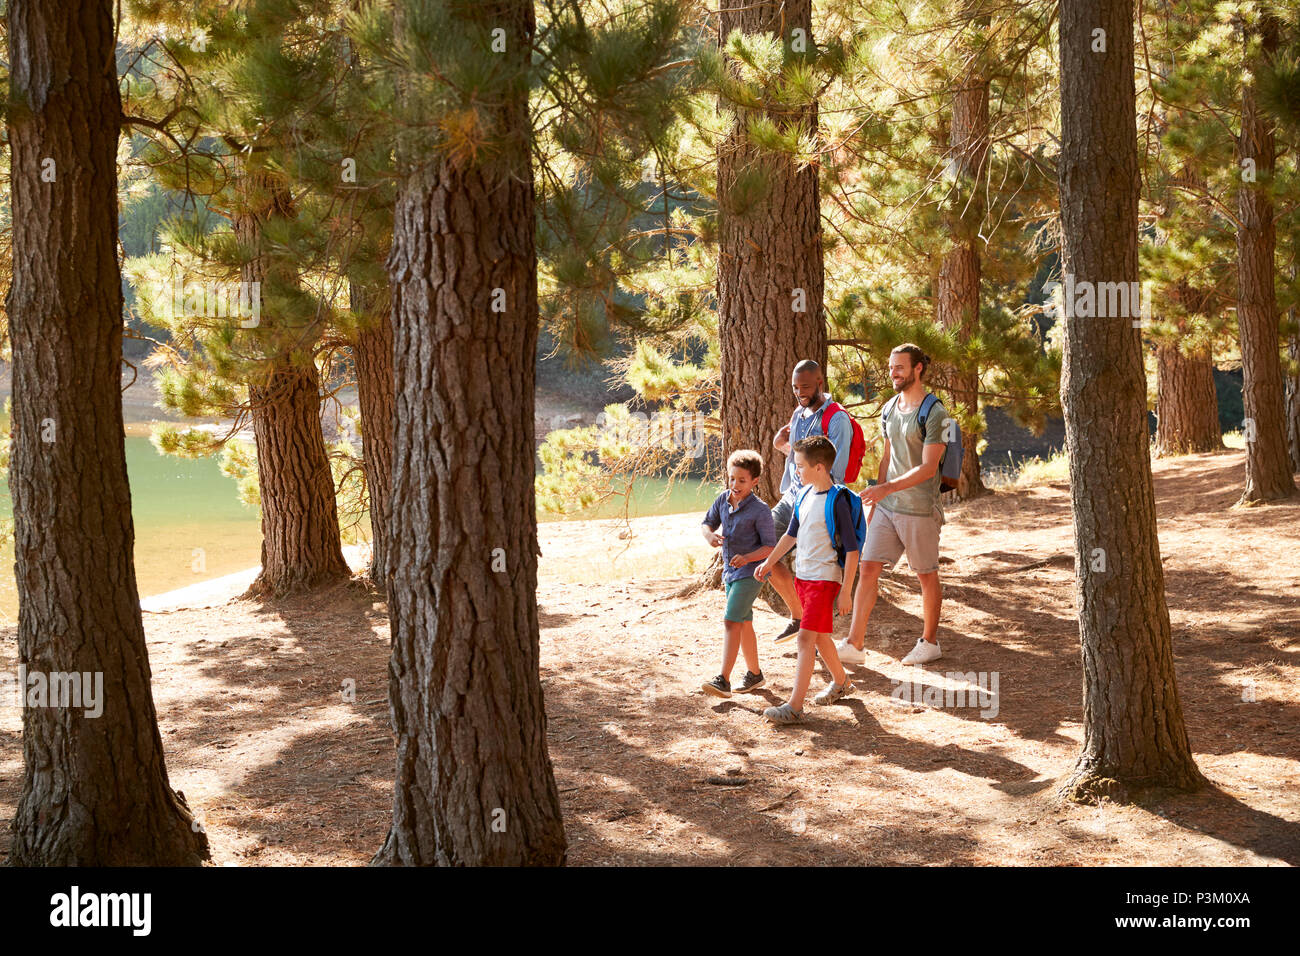 Boys With Fathers On Hiking Adventure Through Forest Stock Photo